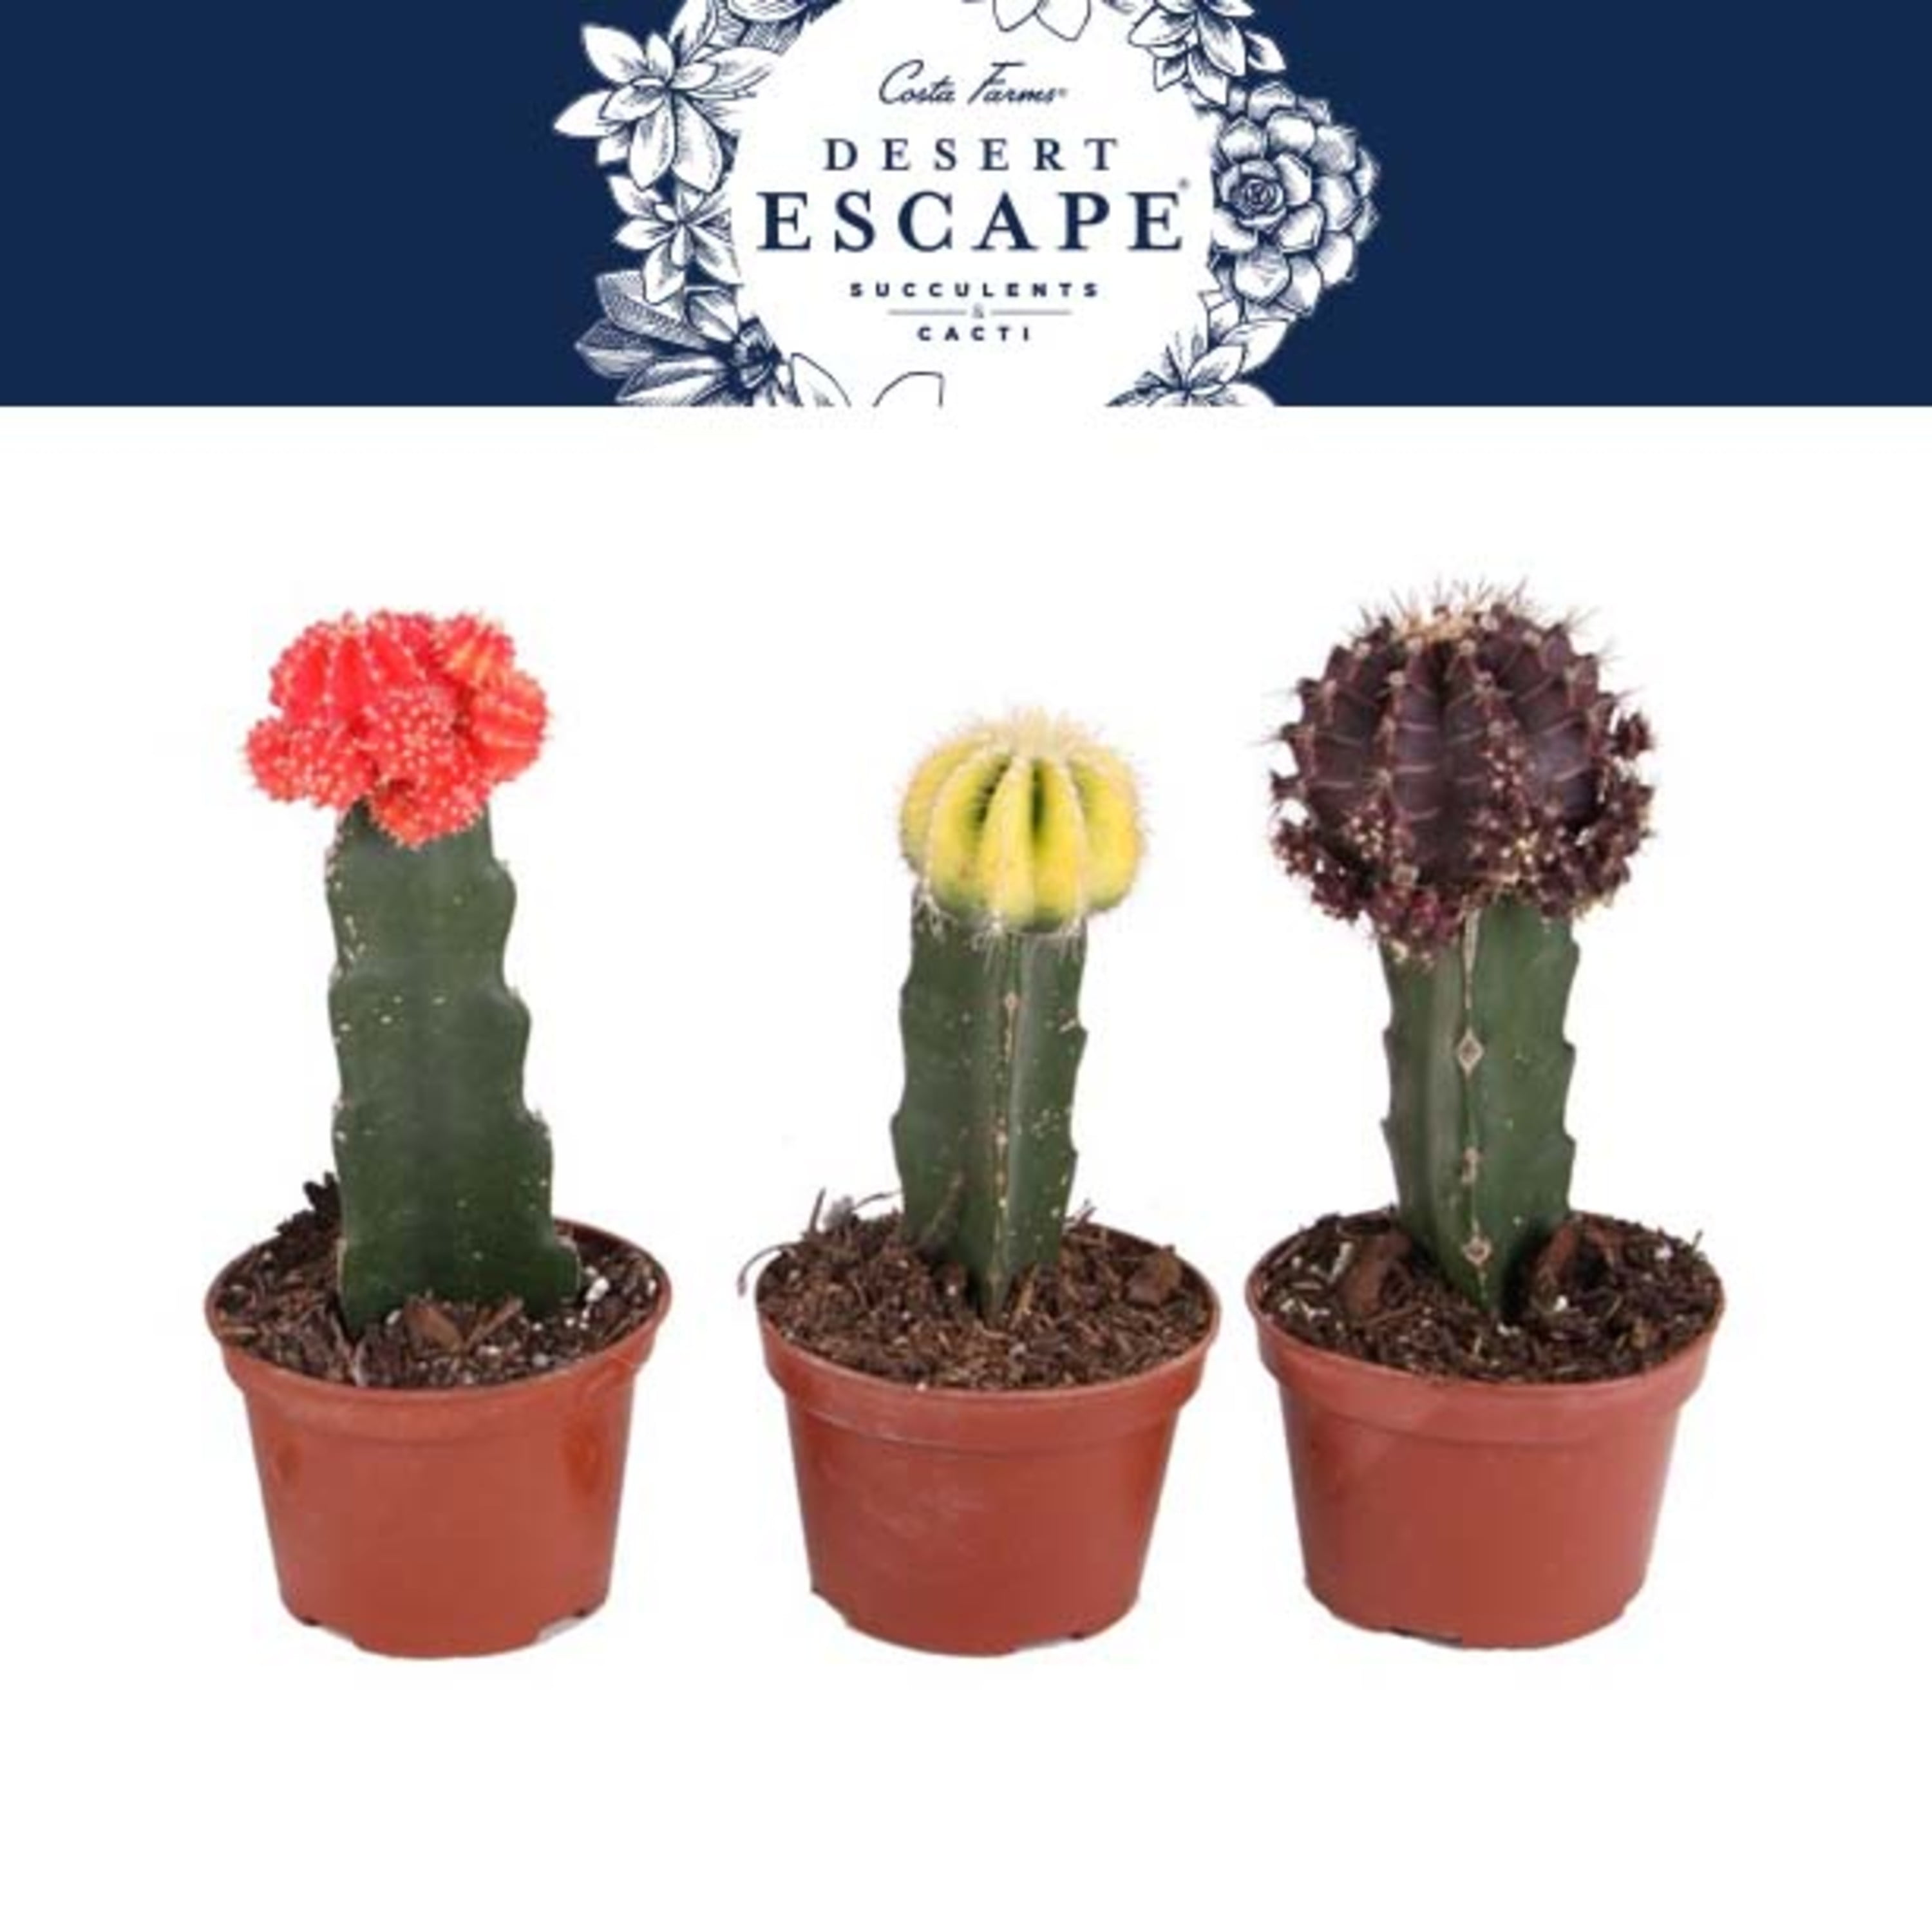 How To Take Care Of A Cactus With/deco Flower Costa Farms Desert Escape Live Indoor 10in. Tall Green Cactus; Bright,  Direct Sunlight Plant in 4in. Grower Pot, 3-Pack - Walmart.com